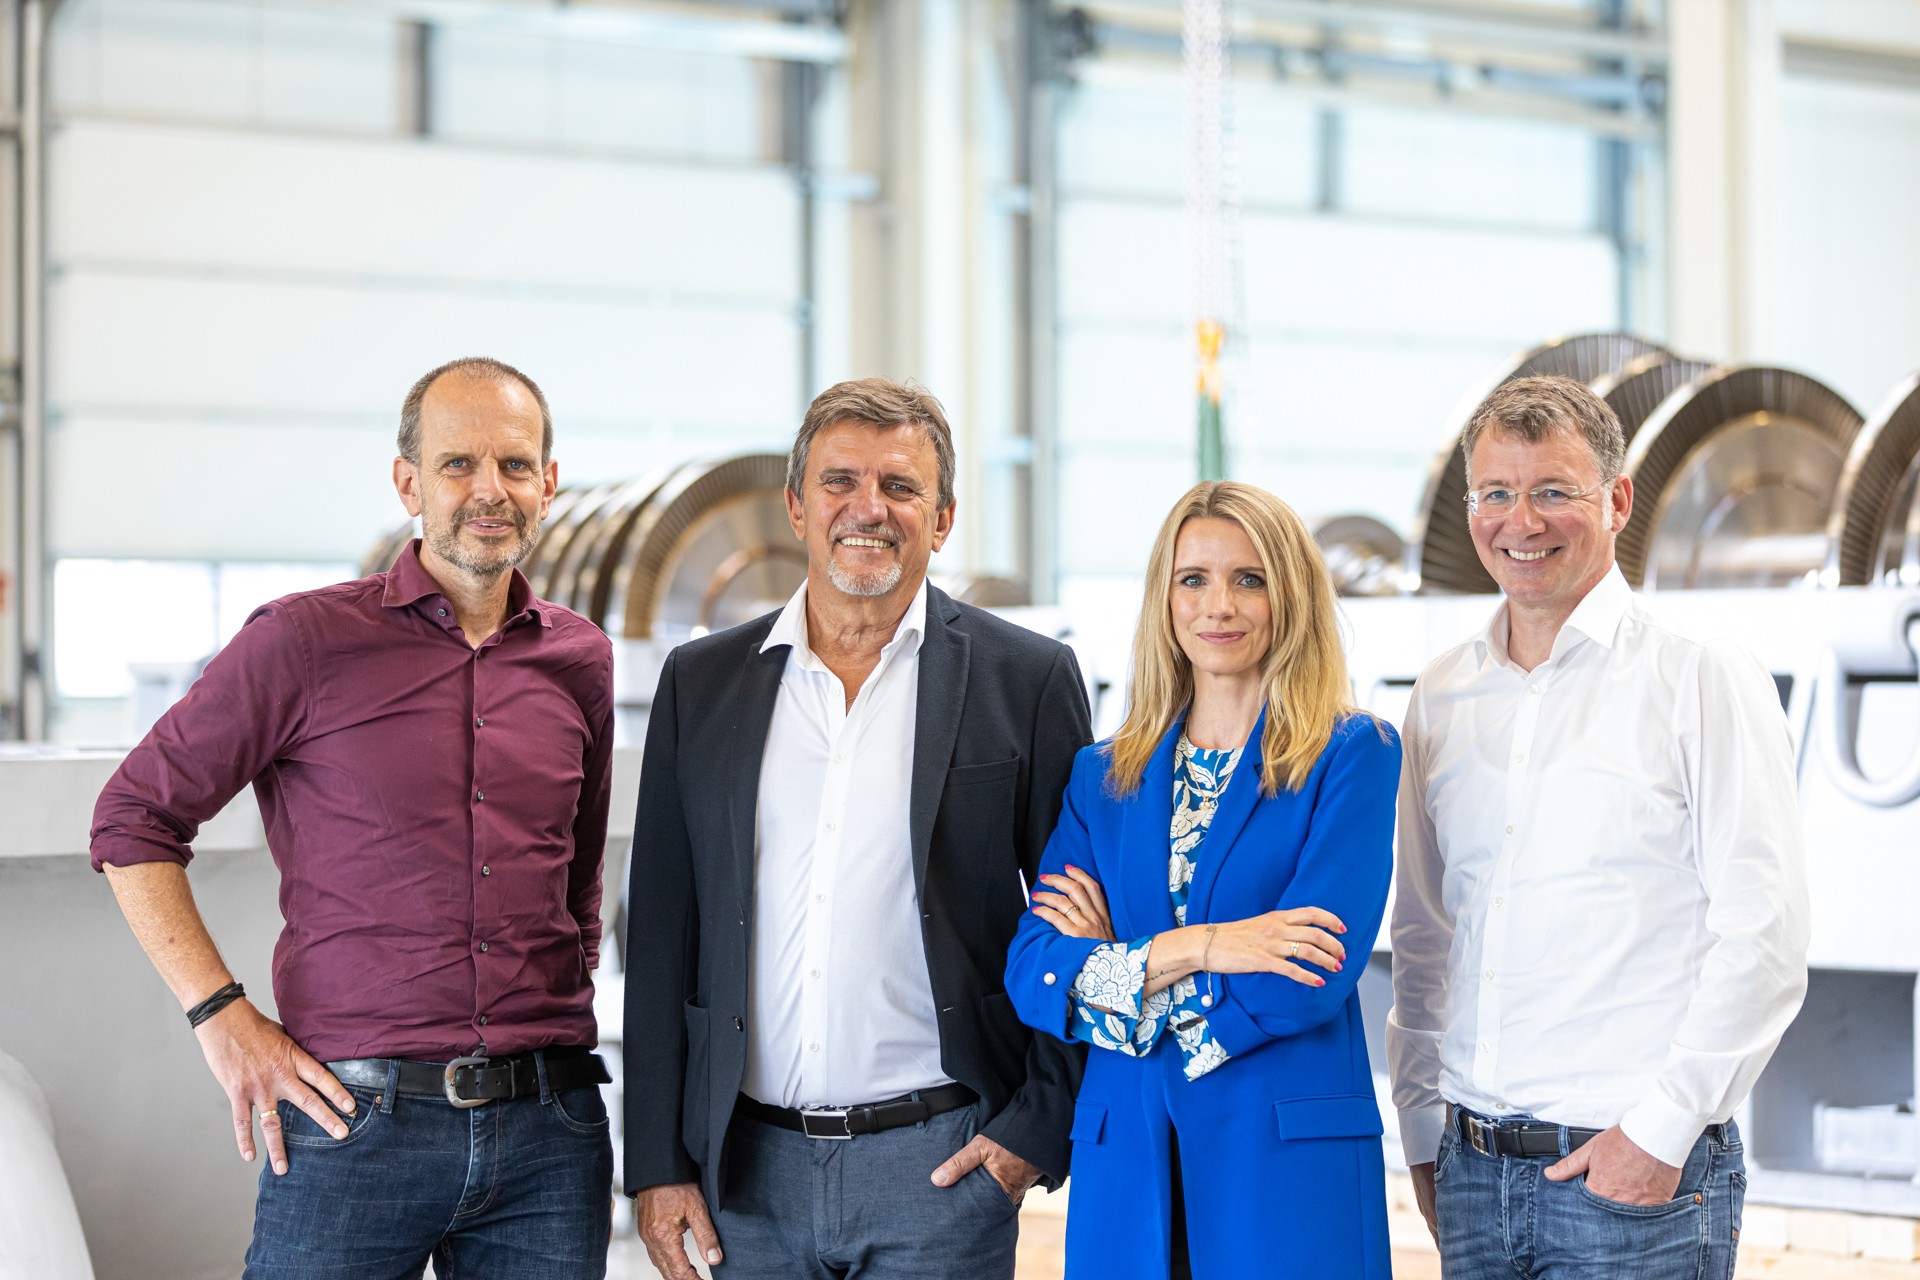 Management Board (l. to r.): Sven Kohl (Director of Sales and Project Management), Edwin Mecklenburger (Founder and Managing Director), Nina Mecklenburger-Galkowski (Director Corporate Development), Ulrich Heimann (Director Engineering)